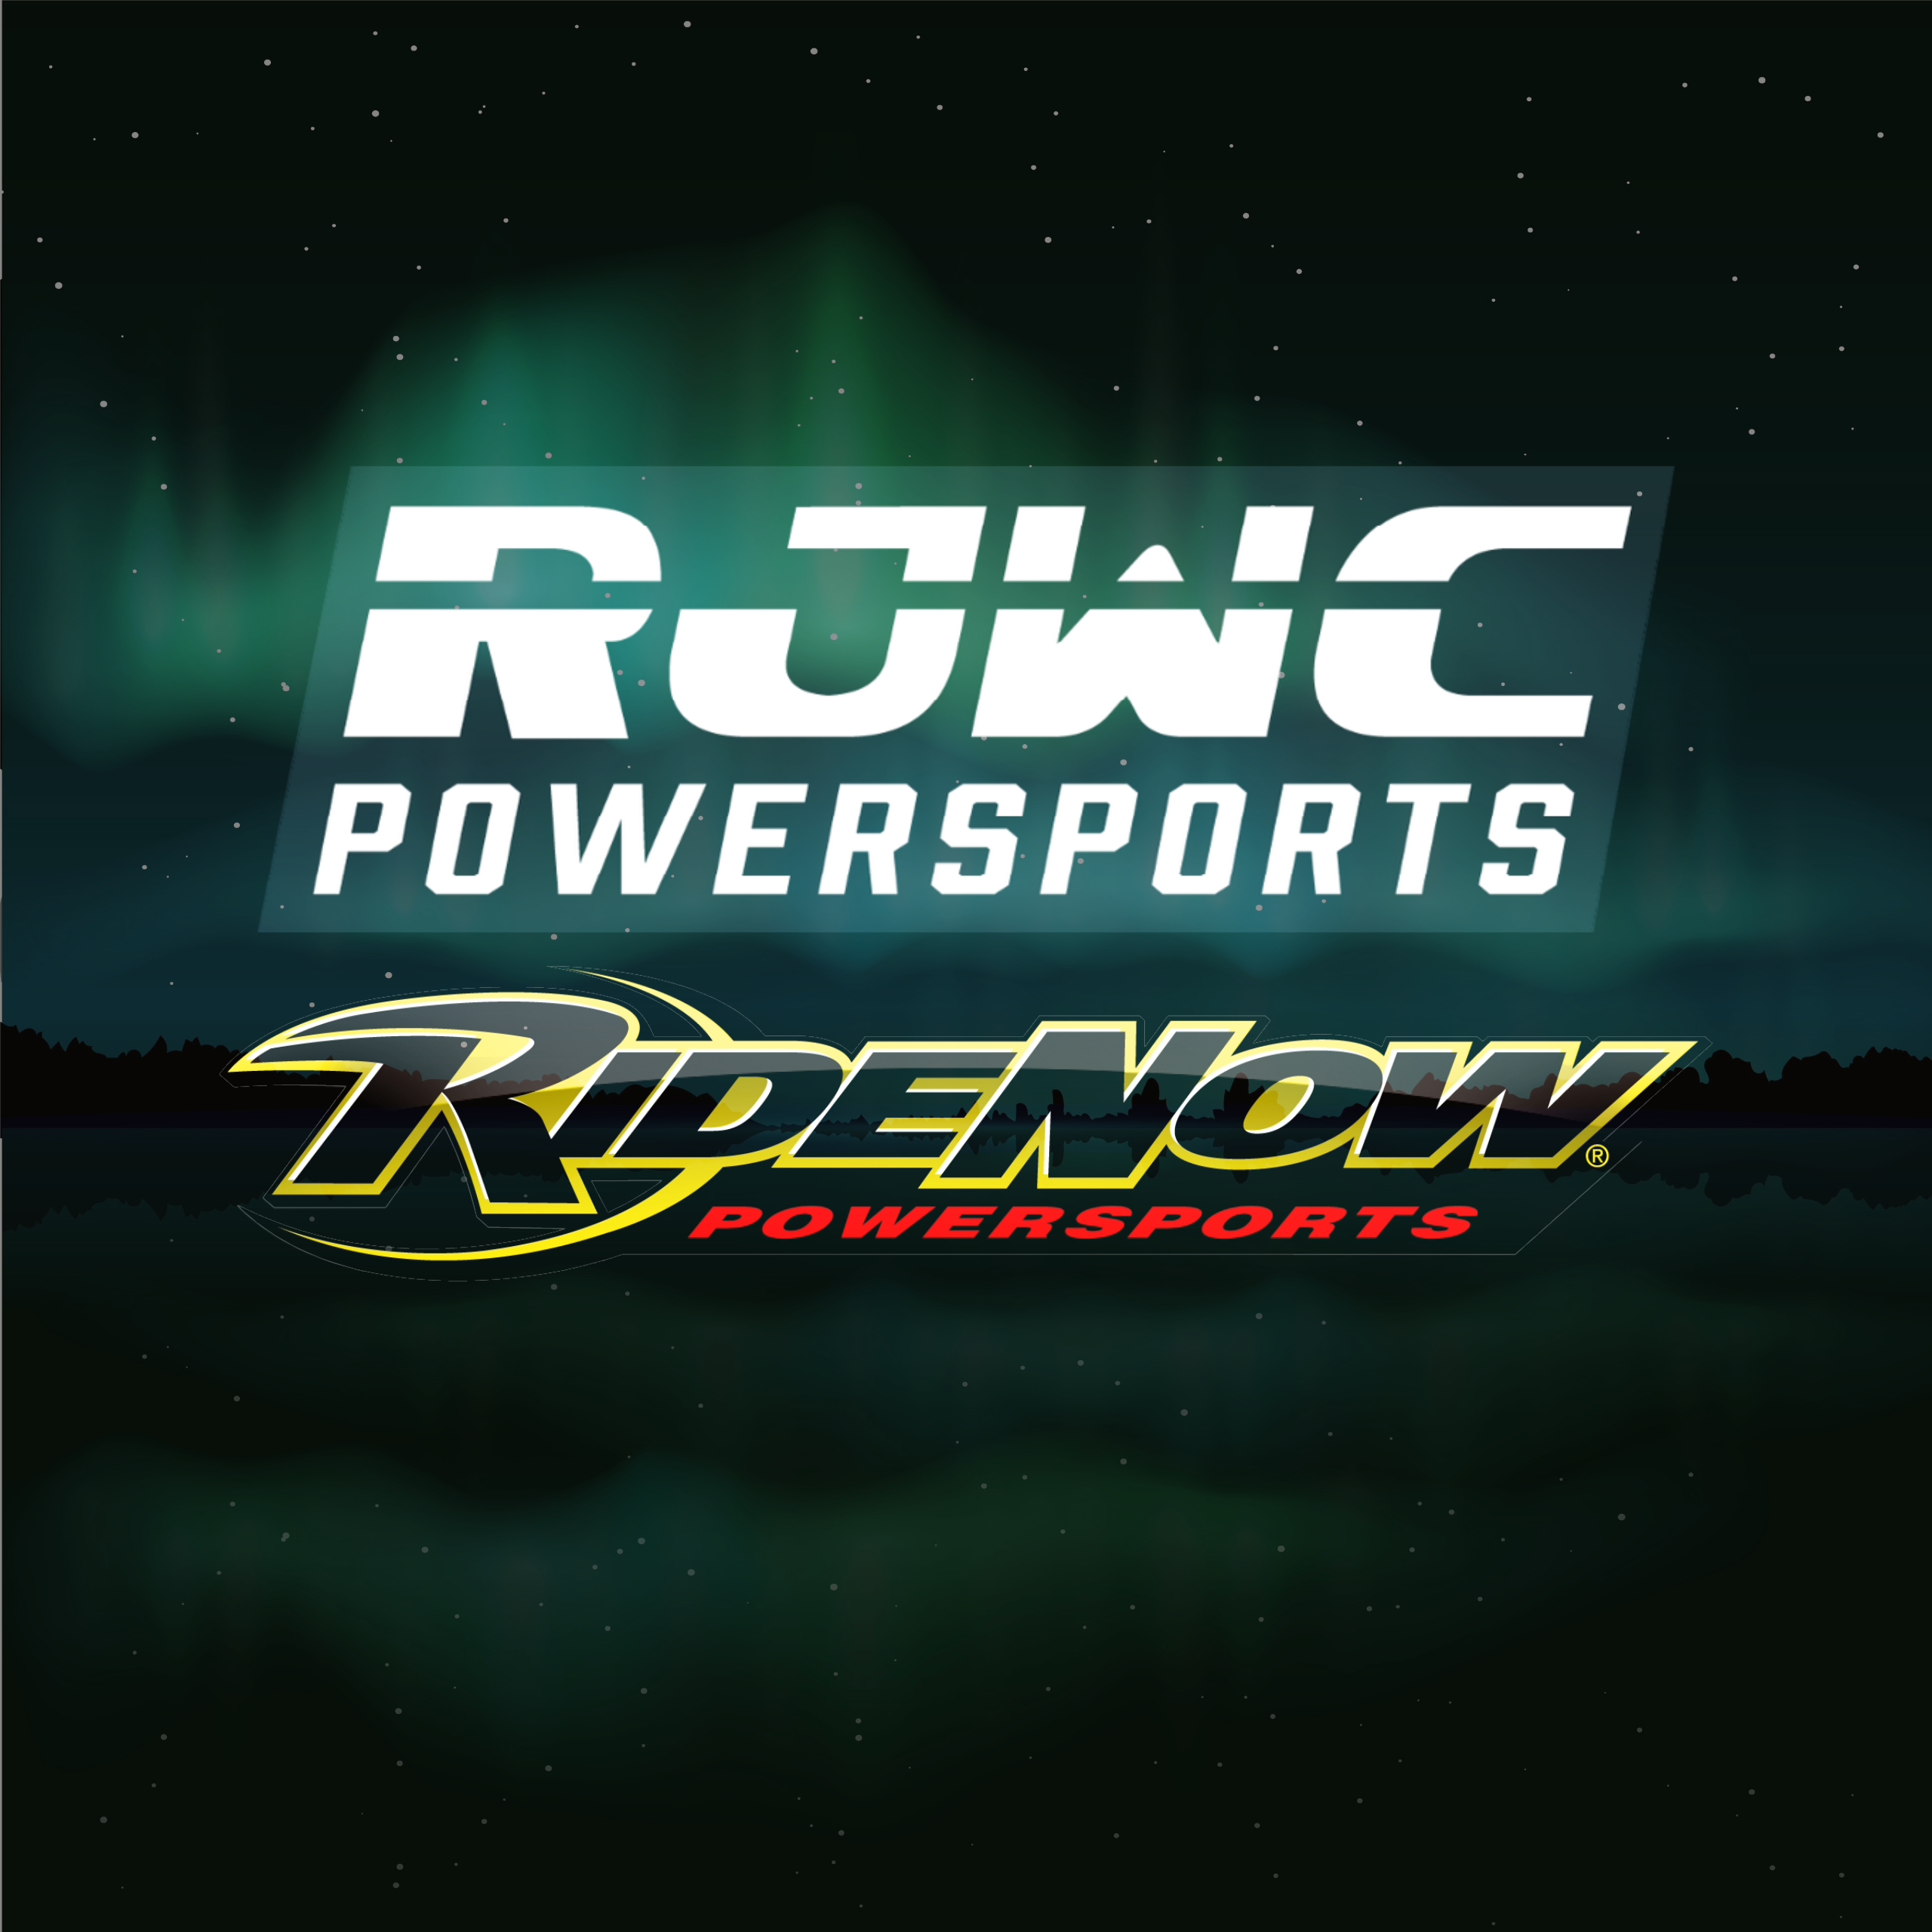 RJWC Powersports Now an Approved Vendor for RideNow: A Milestone in Powersports Retail